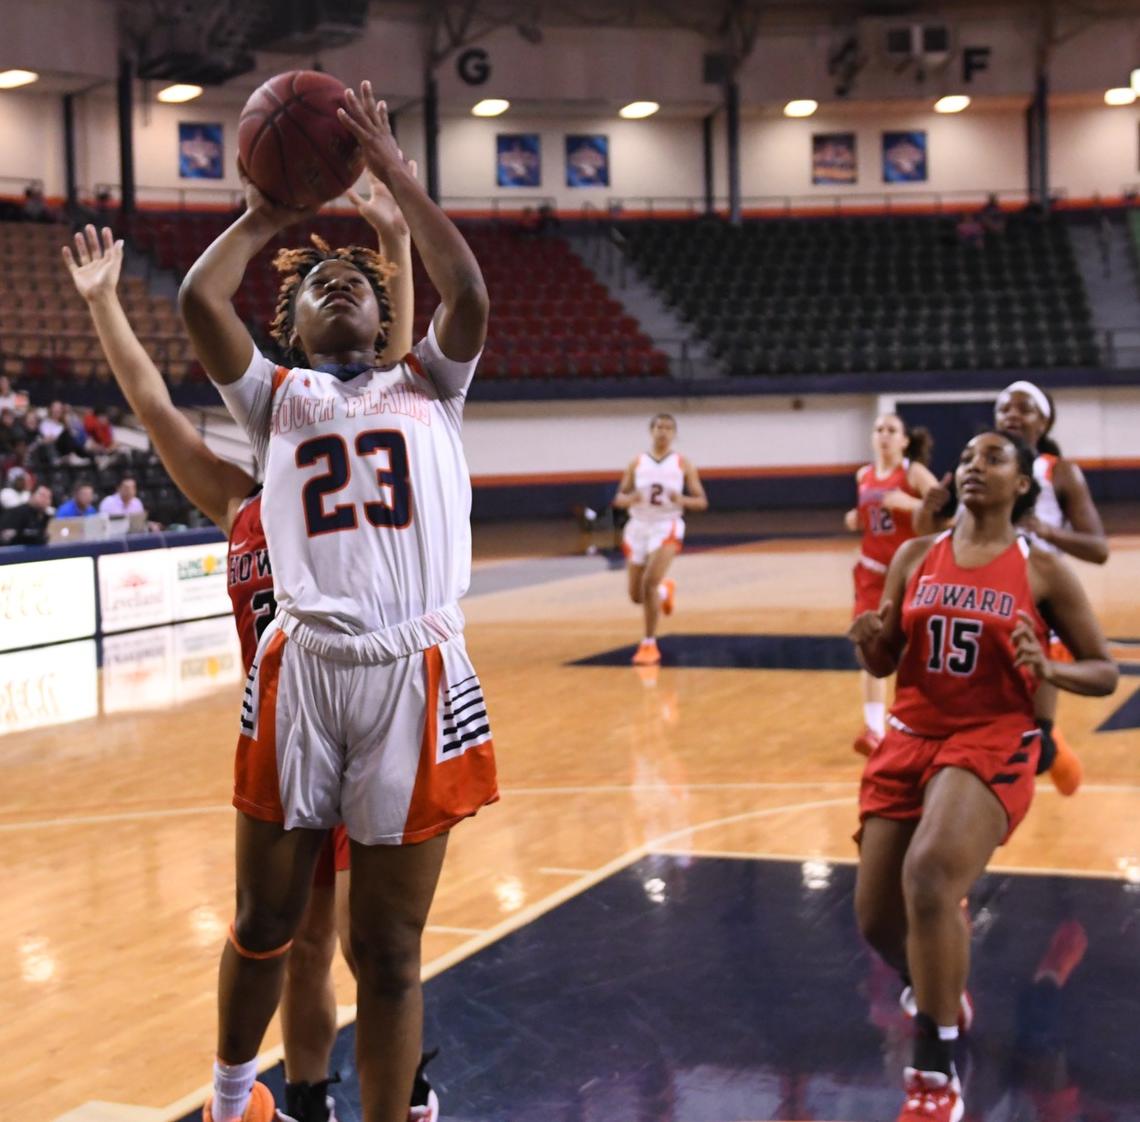 McCoy's double-double pushes #2 Lady Texans past Howard 73-41 Wednesday